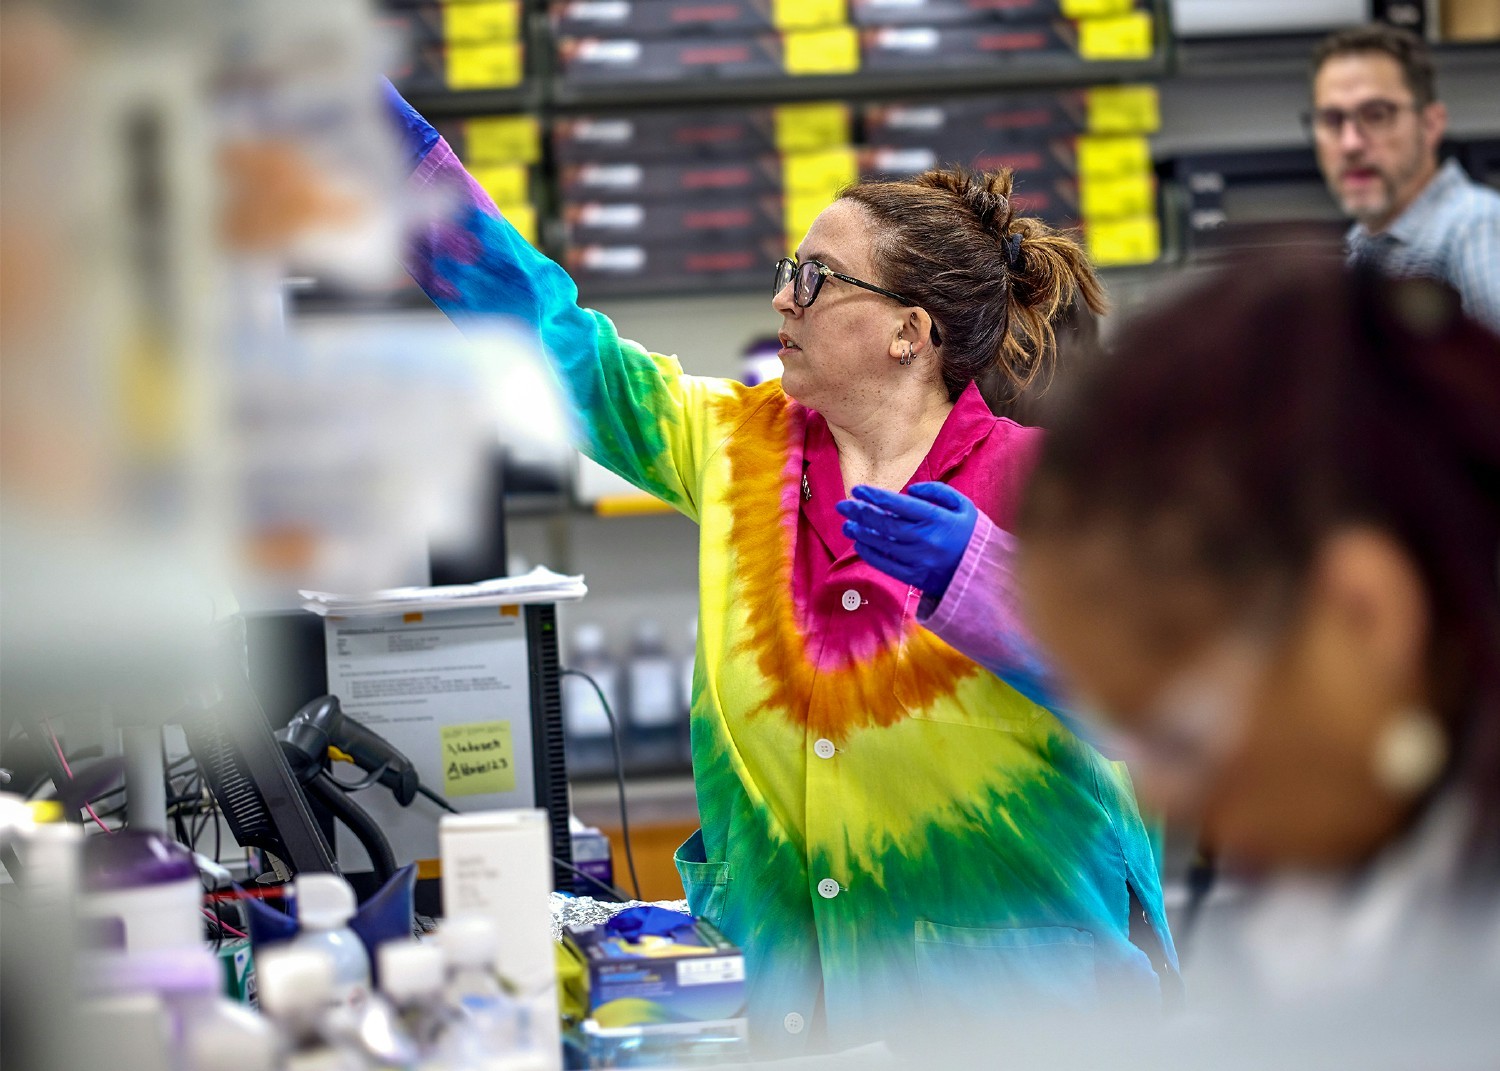 Research & Development employees work in one of AbbVie’s labs.